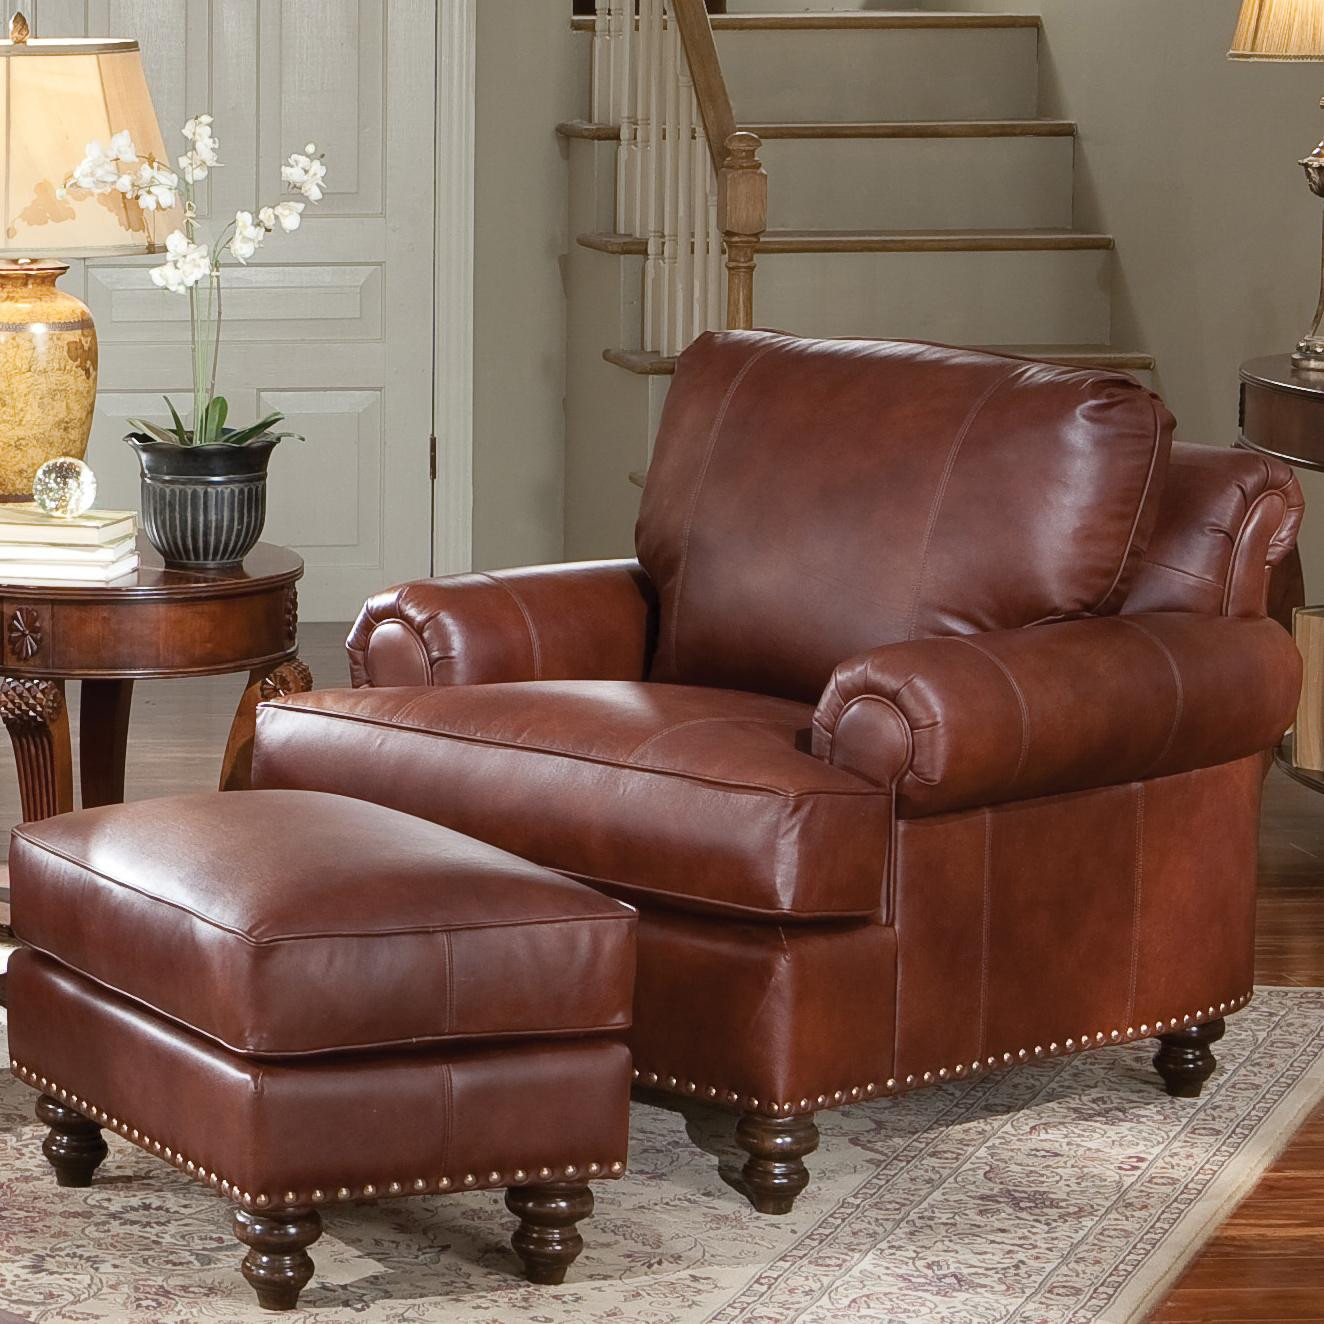 Living Room Chairs With Ottoman
 Furniture Alluring Leather Chair And Ottoman For Cozy